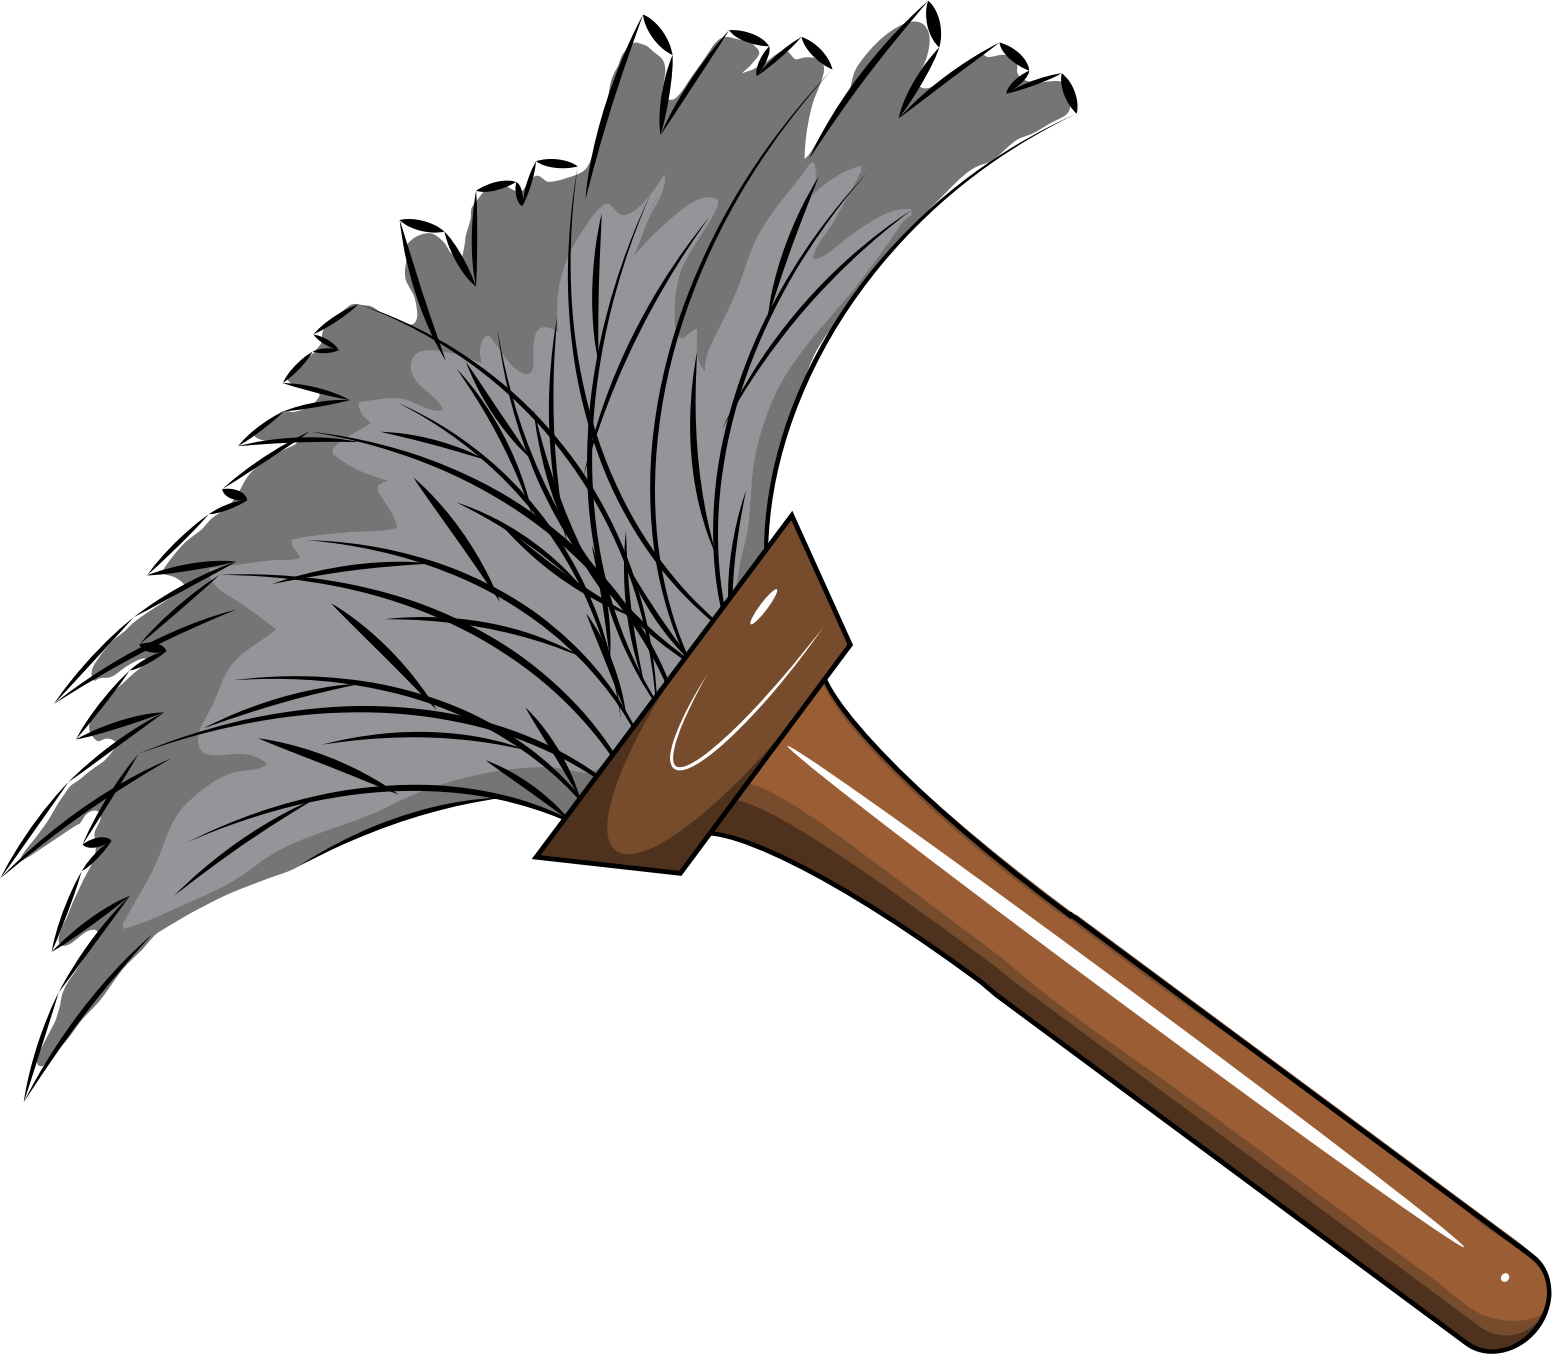 Feather Duster Cleaning Clip Art - Feather Duster Cleaning Clip Art (1552x1354)